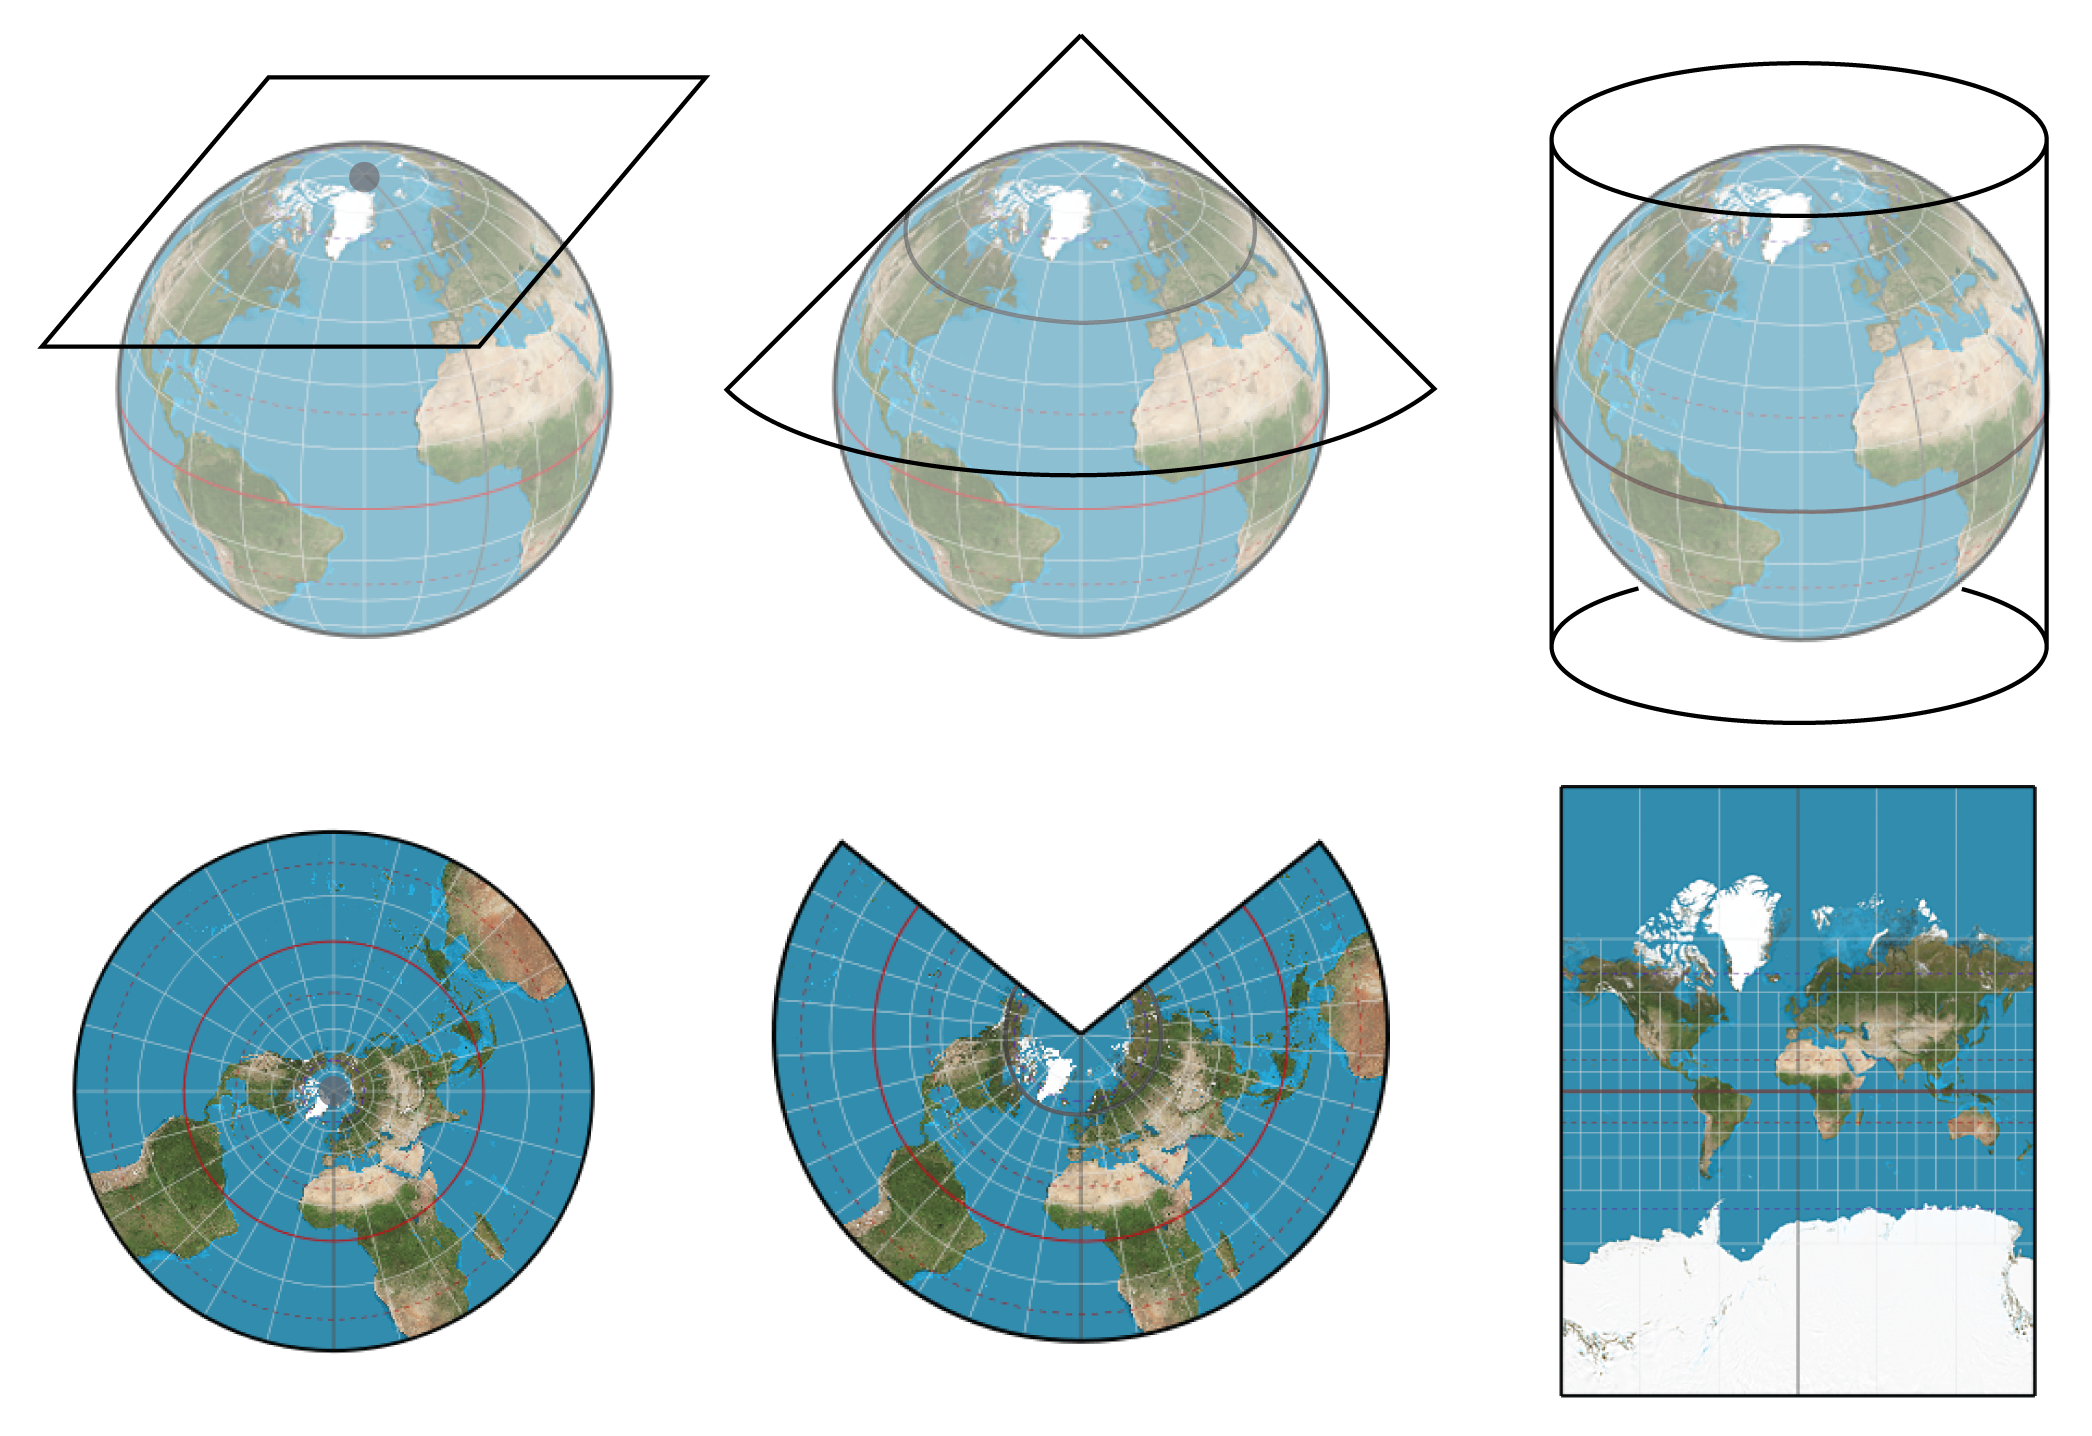 http://gistbok.ucgis.org/sites/default/files/figure2-projections.png